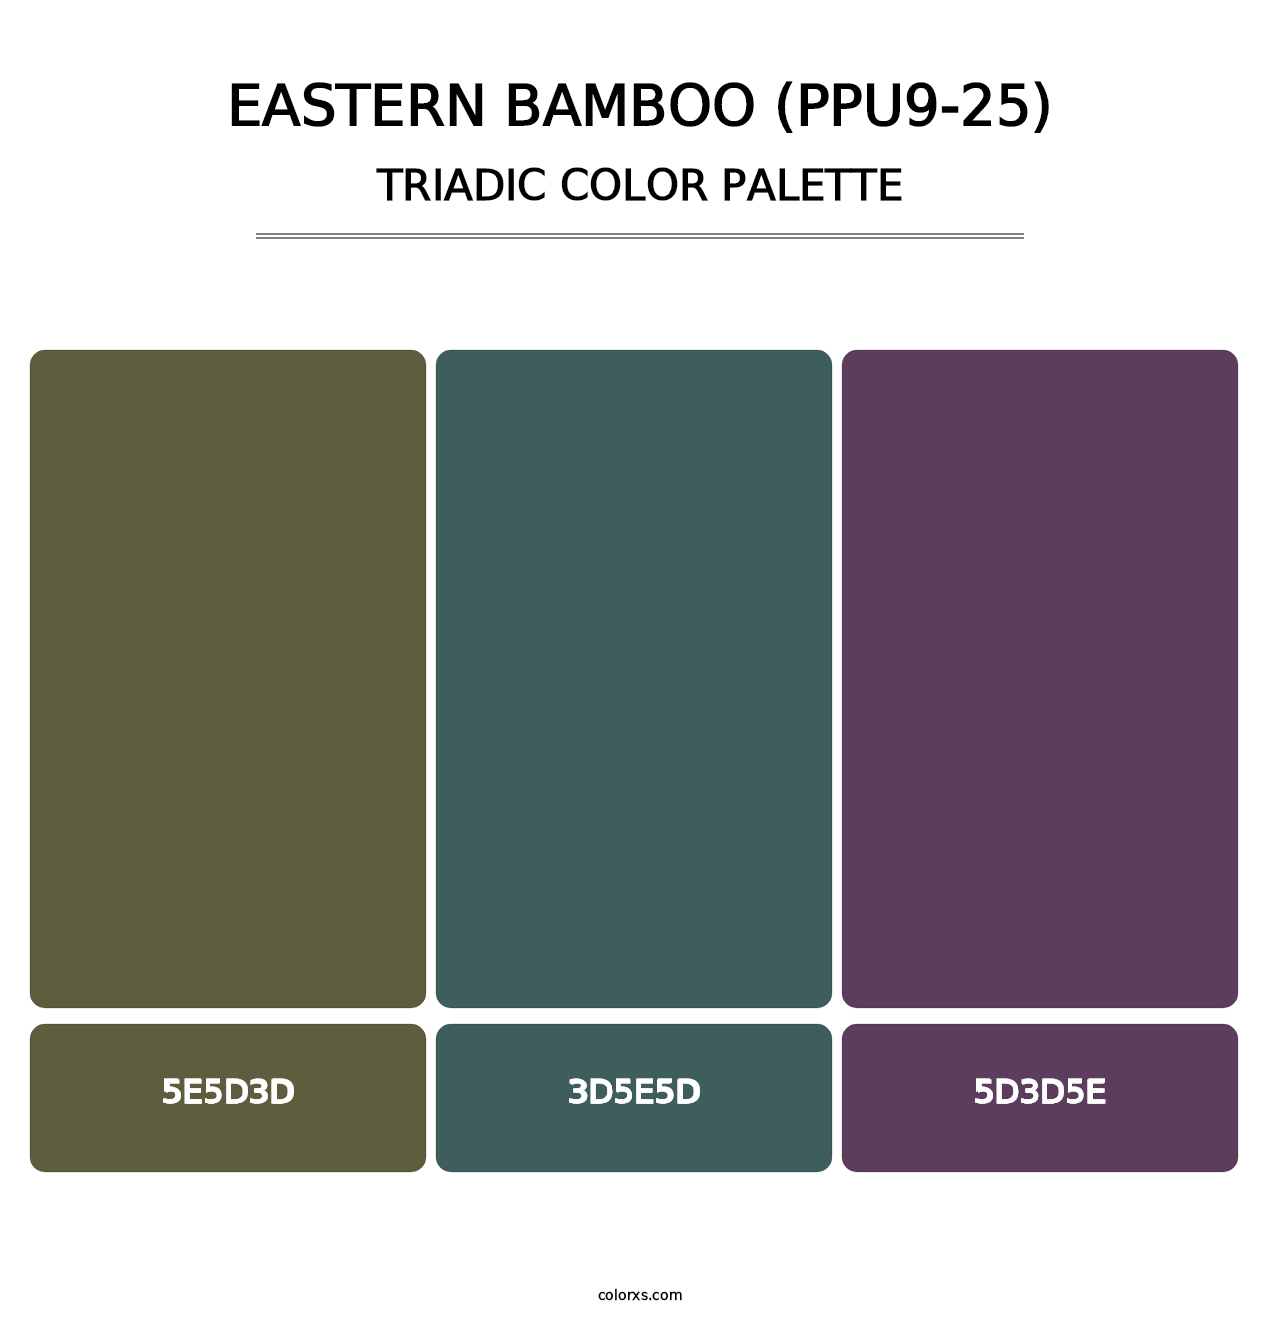 Eastern Bamboo (PPU9-25) - Triadic Color Palette